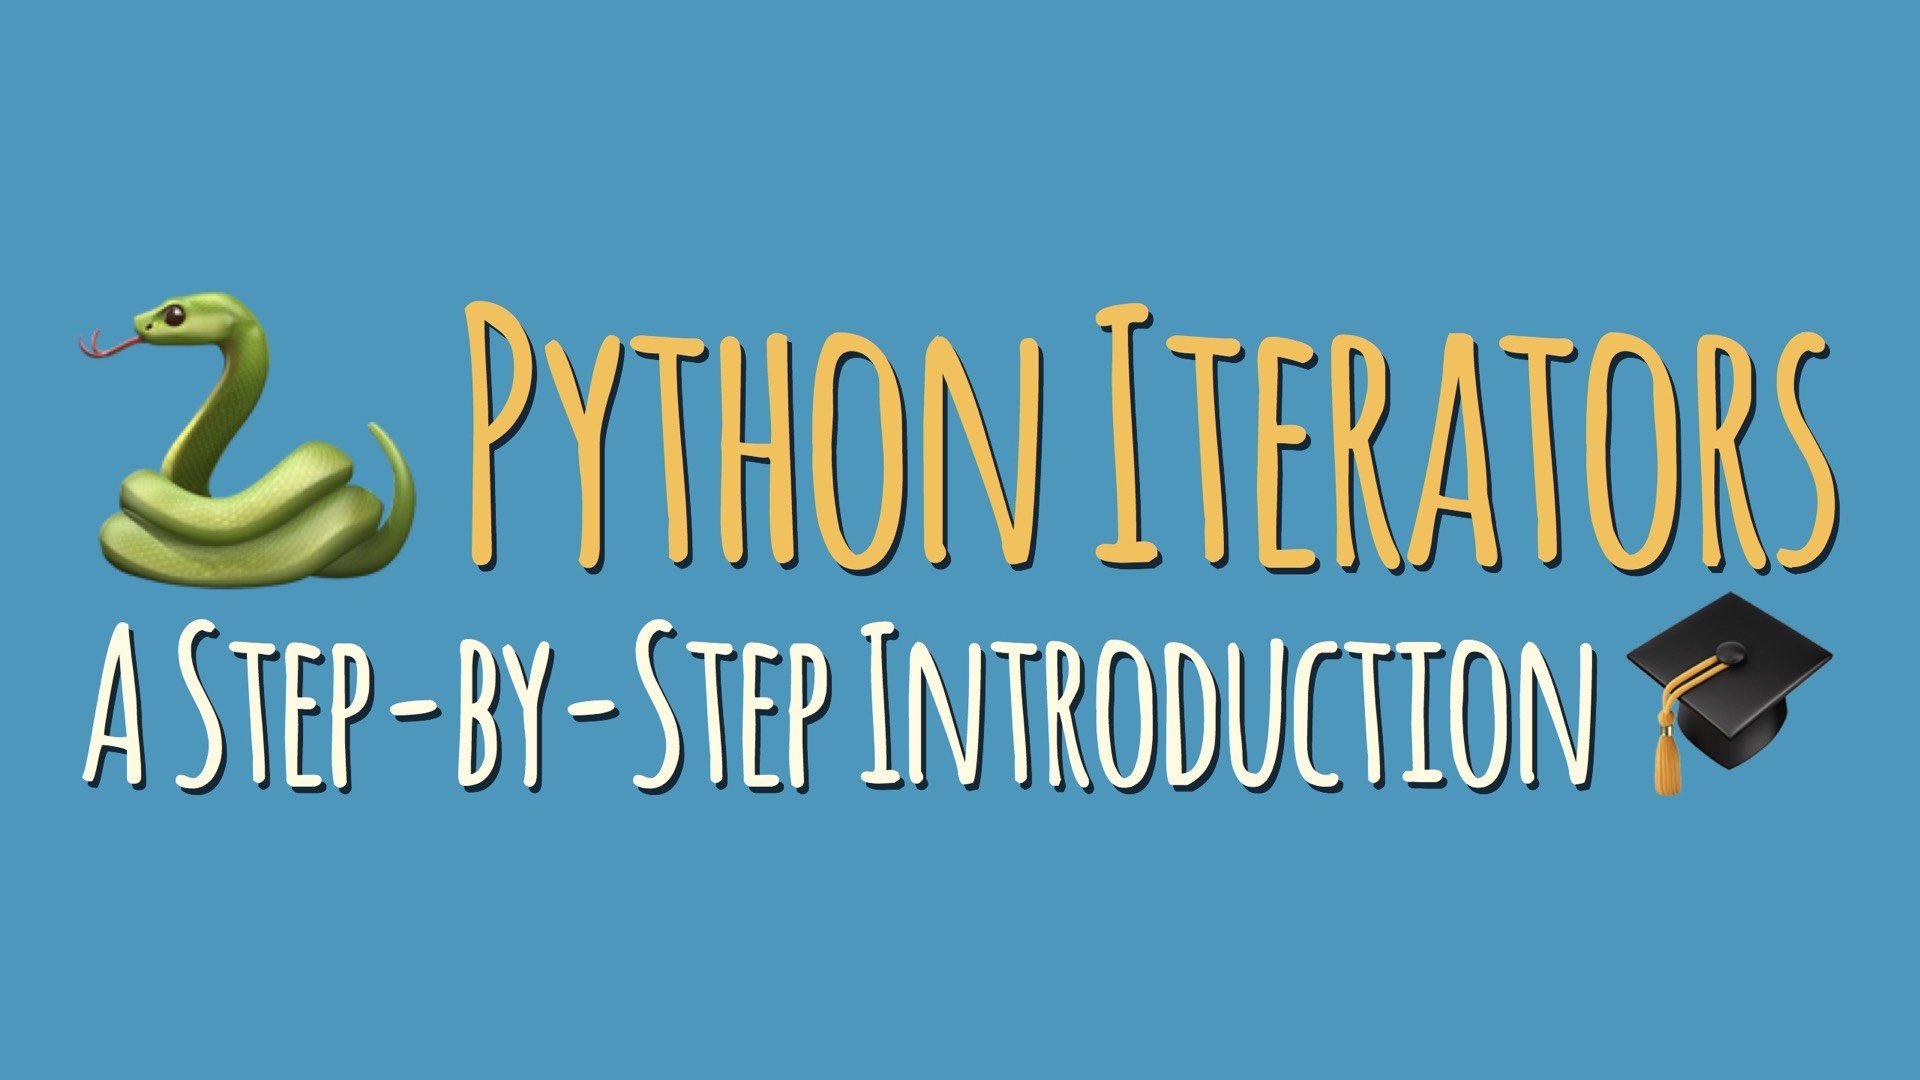 Python Iterators: A Step-By-Step Introduction